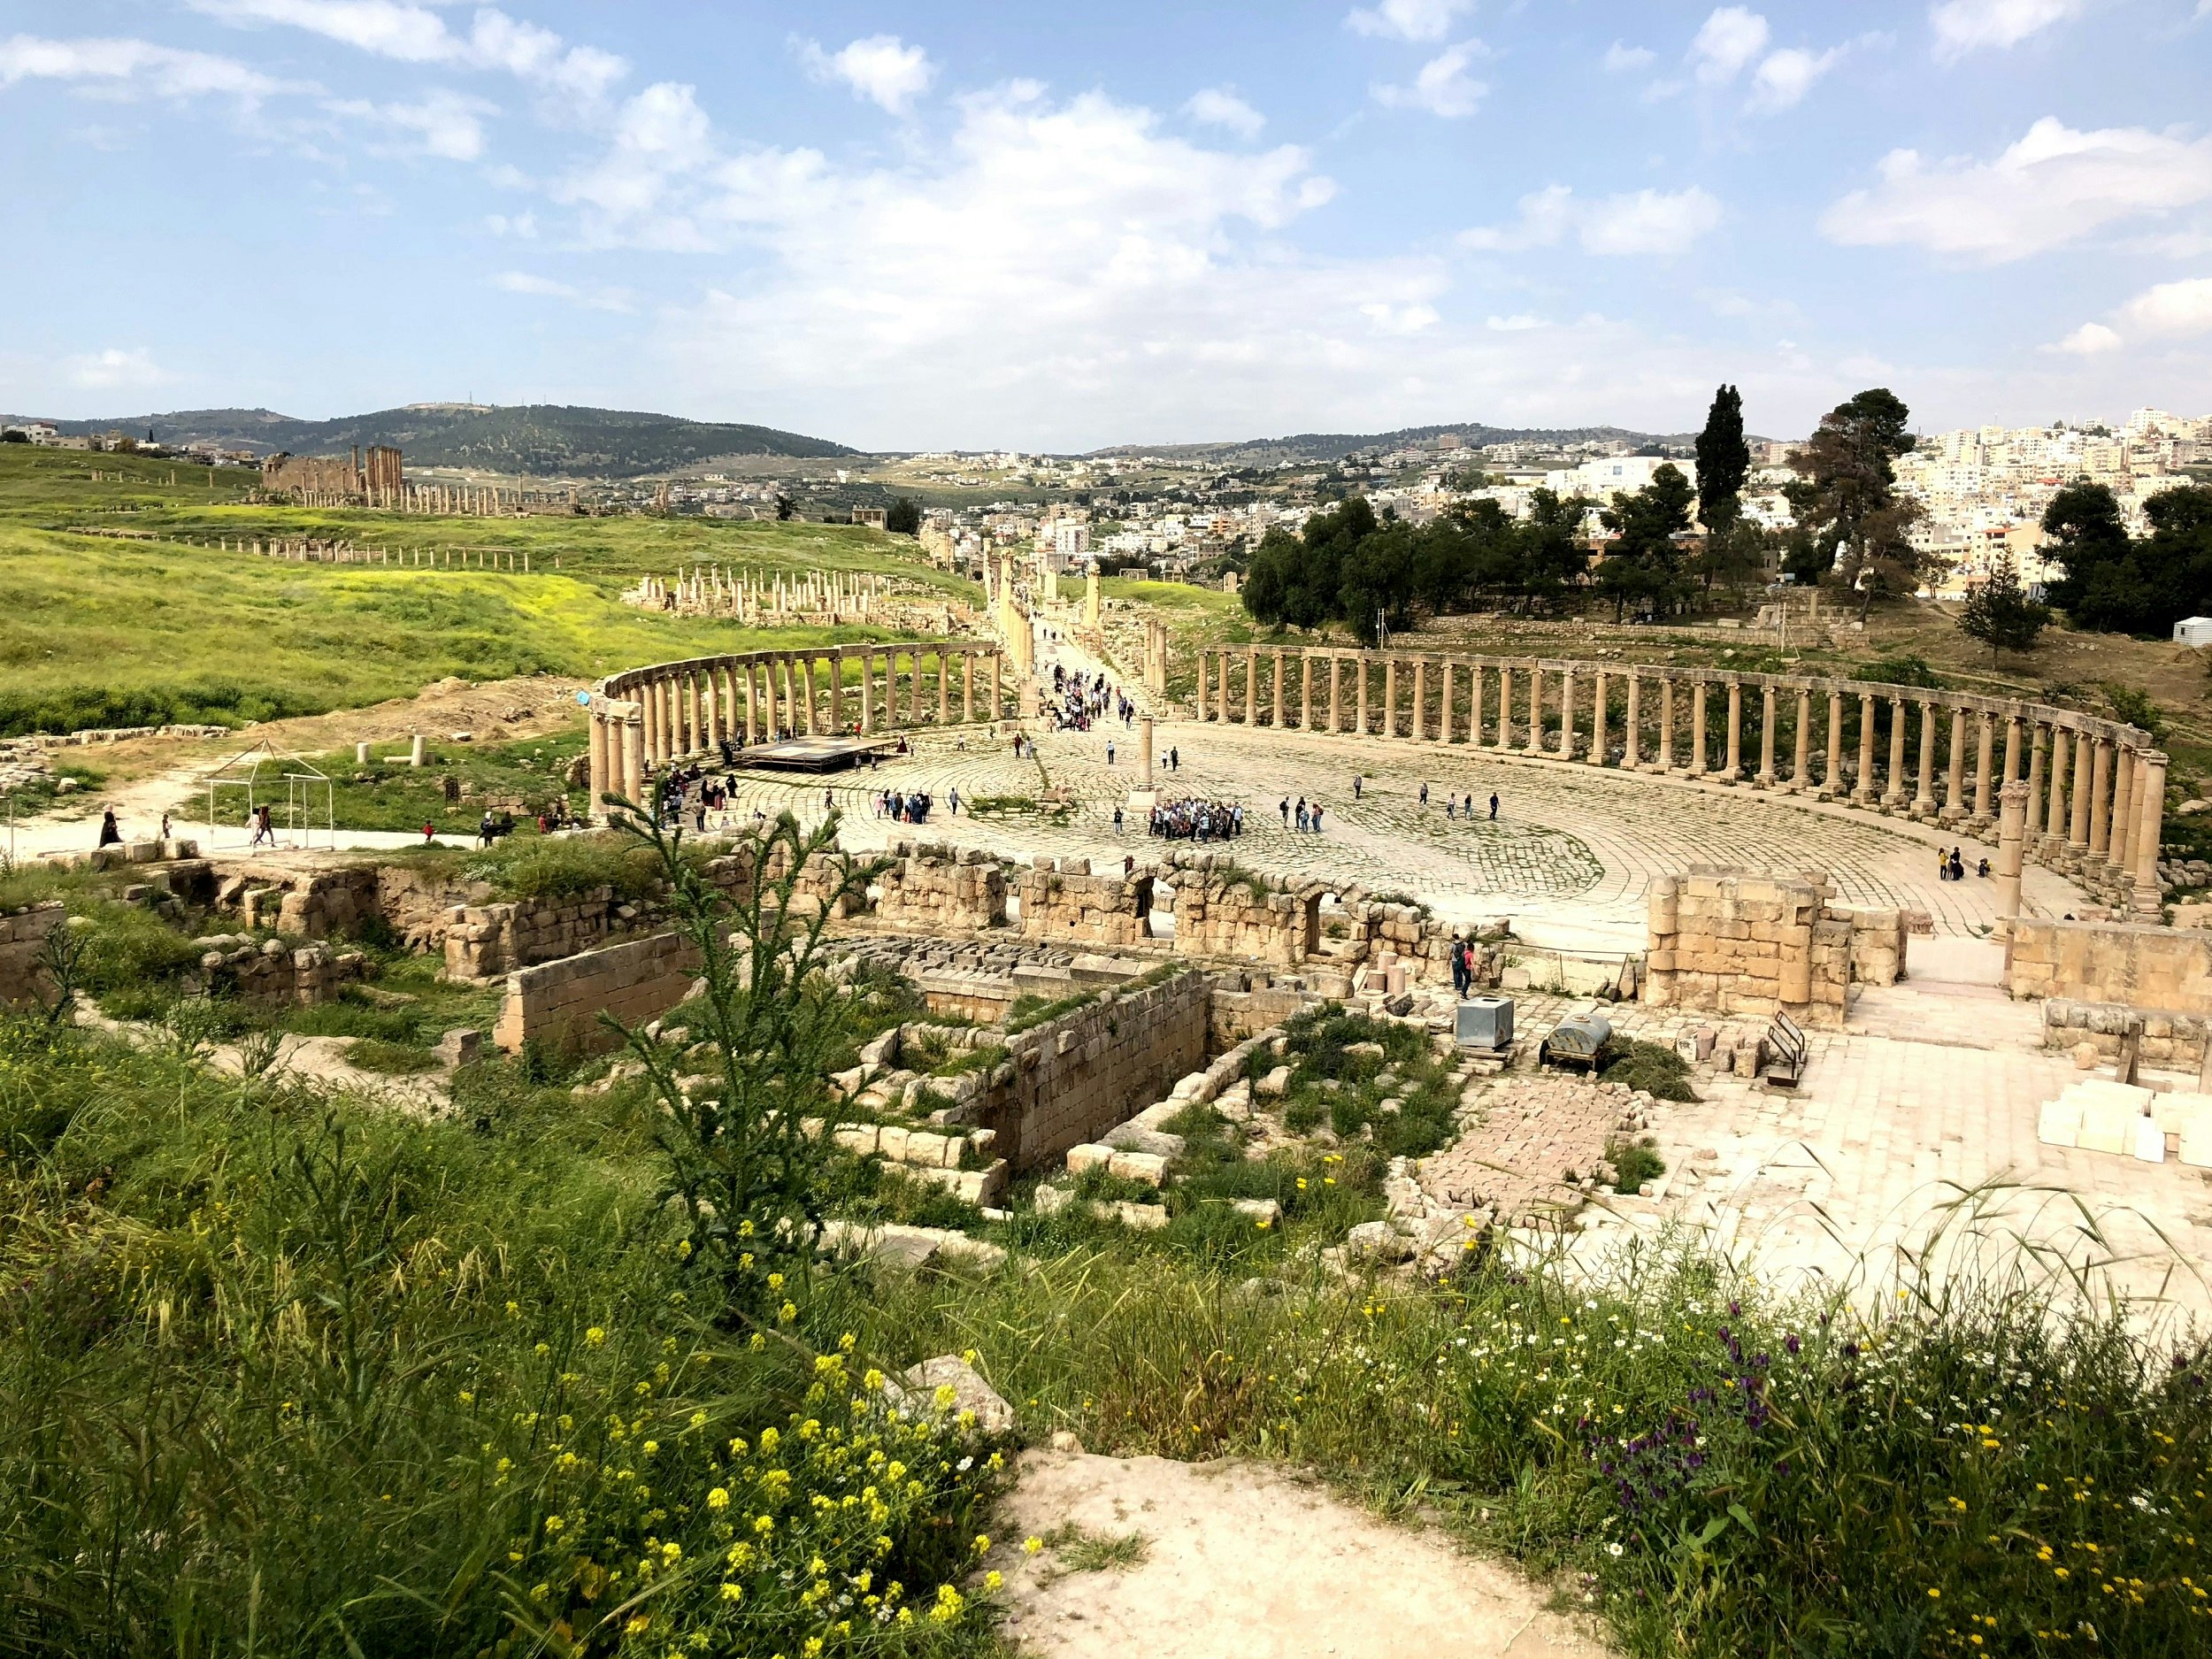 Taken from a spring-flower-filled hill, this image looks over a semi-circular set of pillars that are part of Roman ruins.